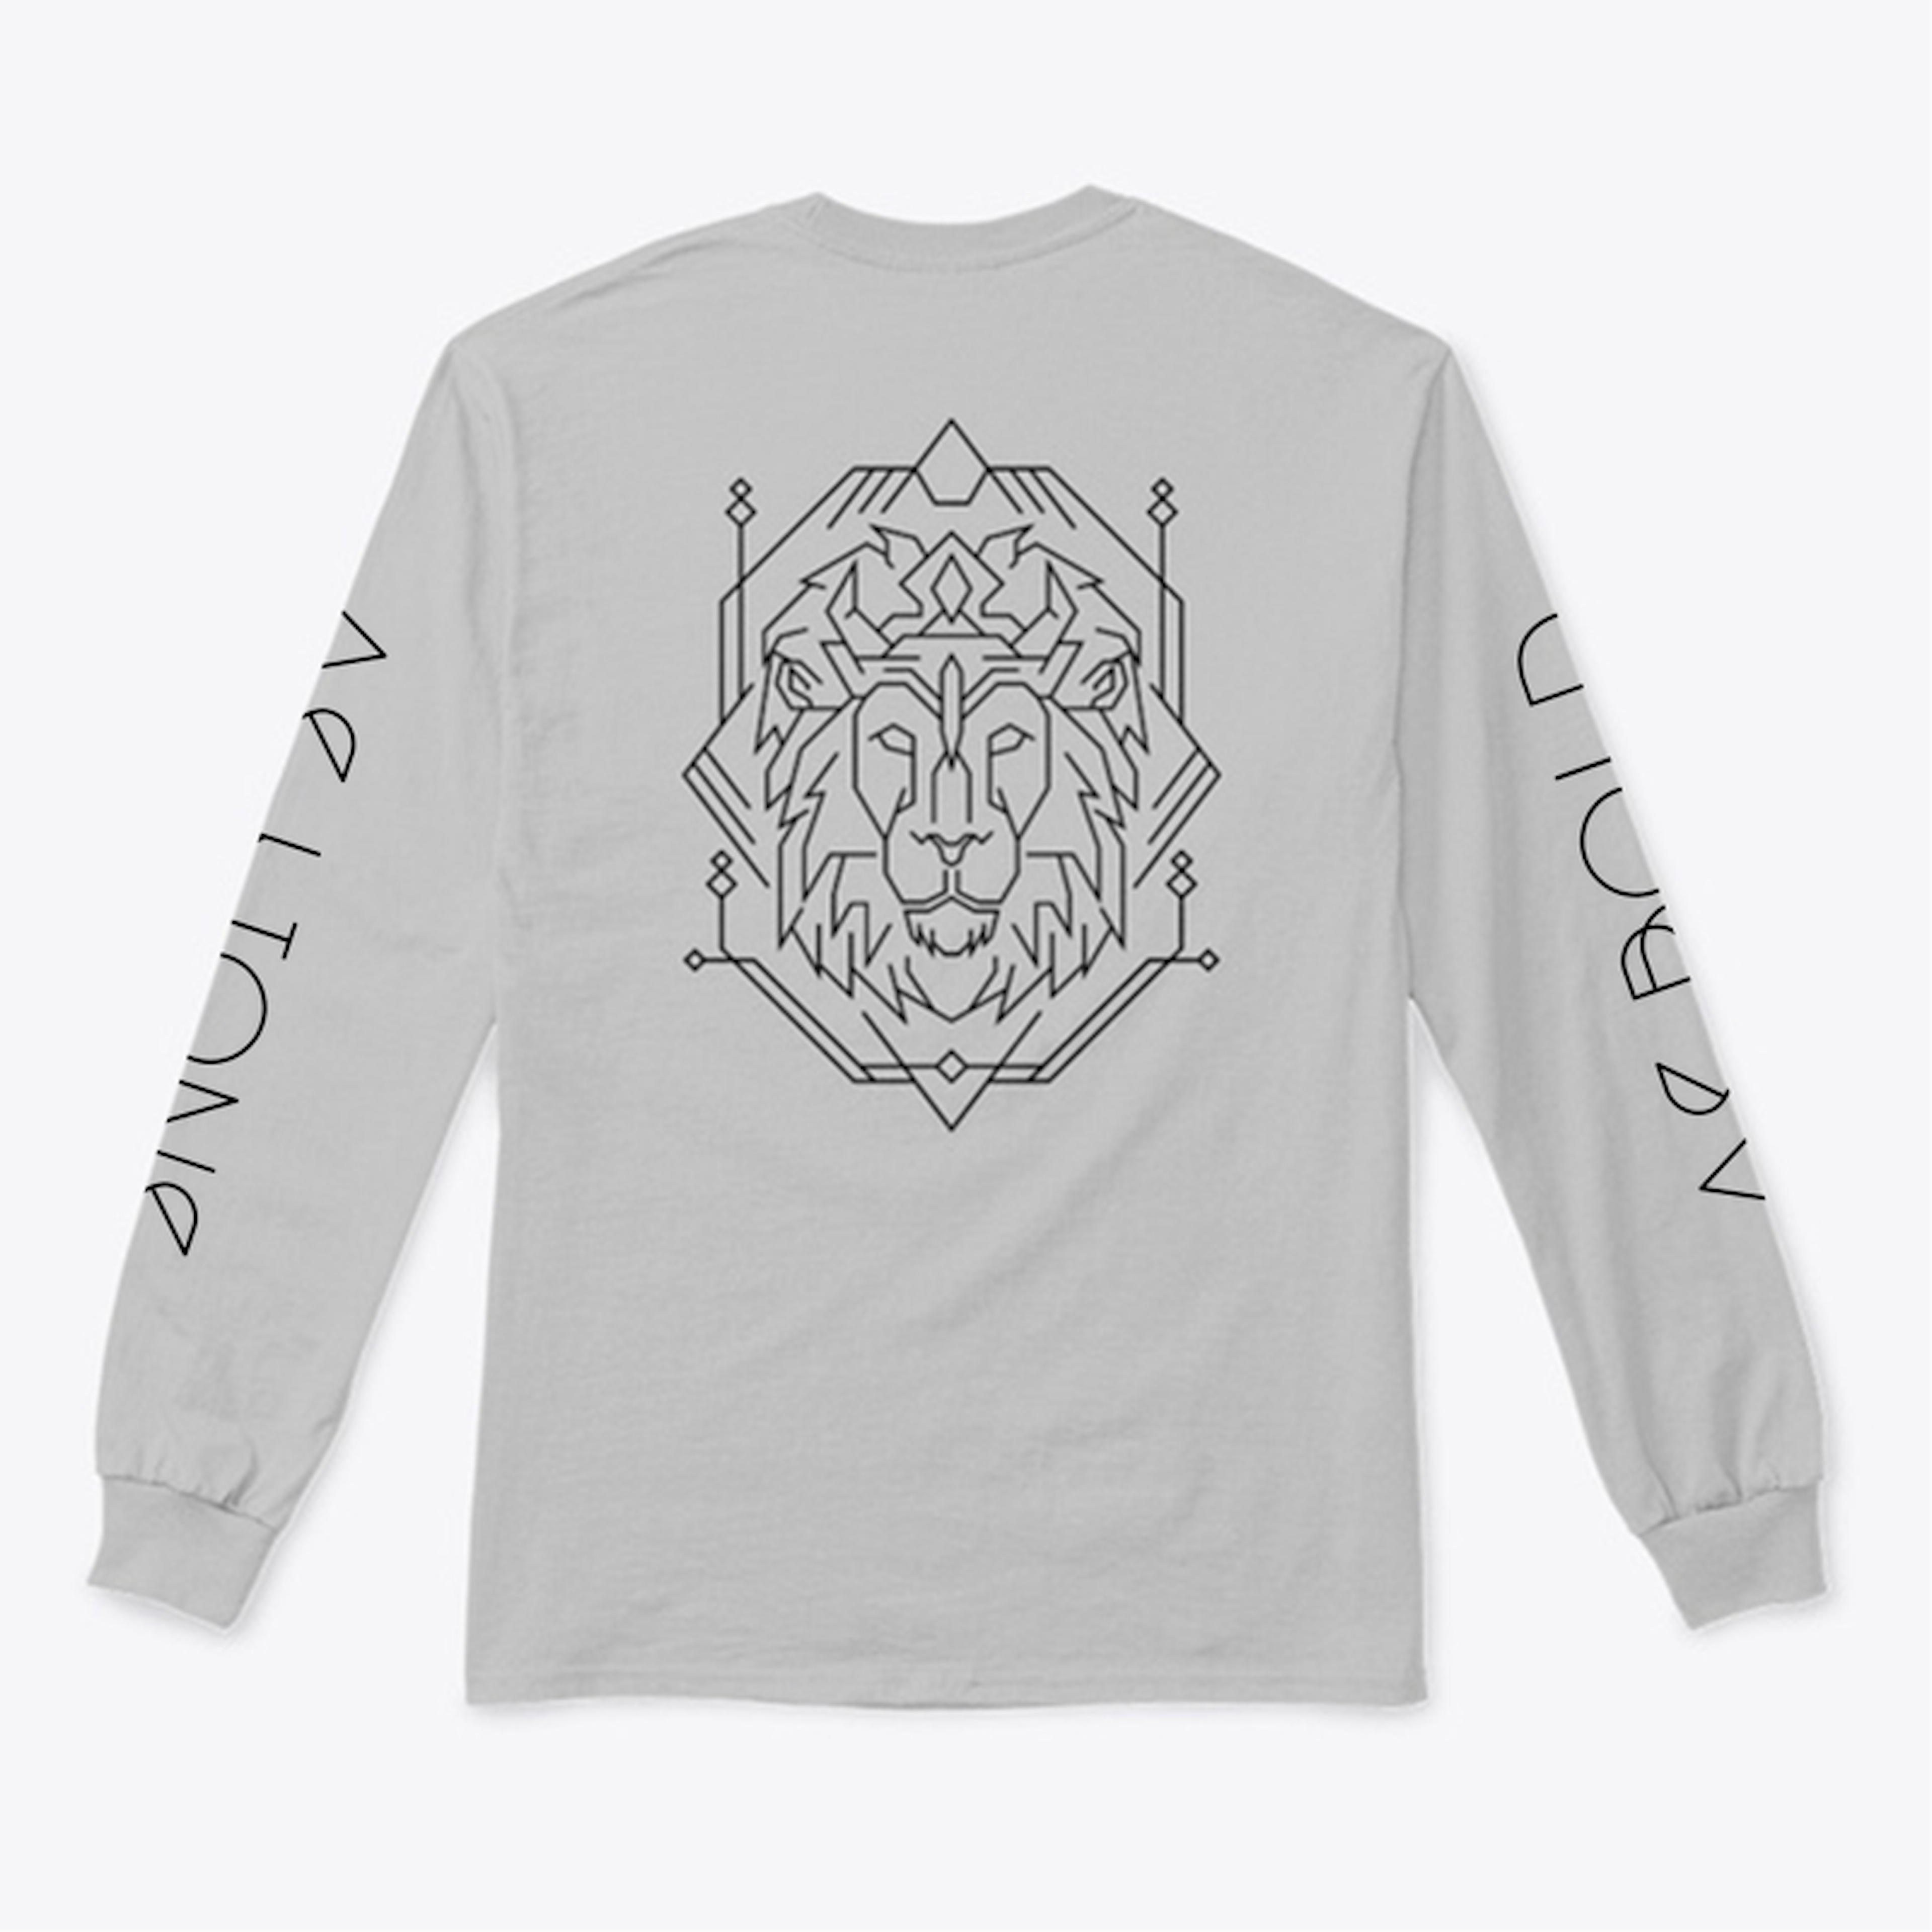 As Bold As Lions Long Sleeve